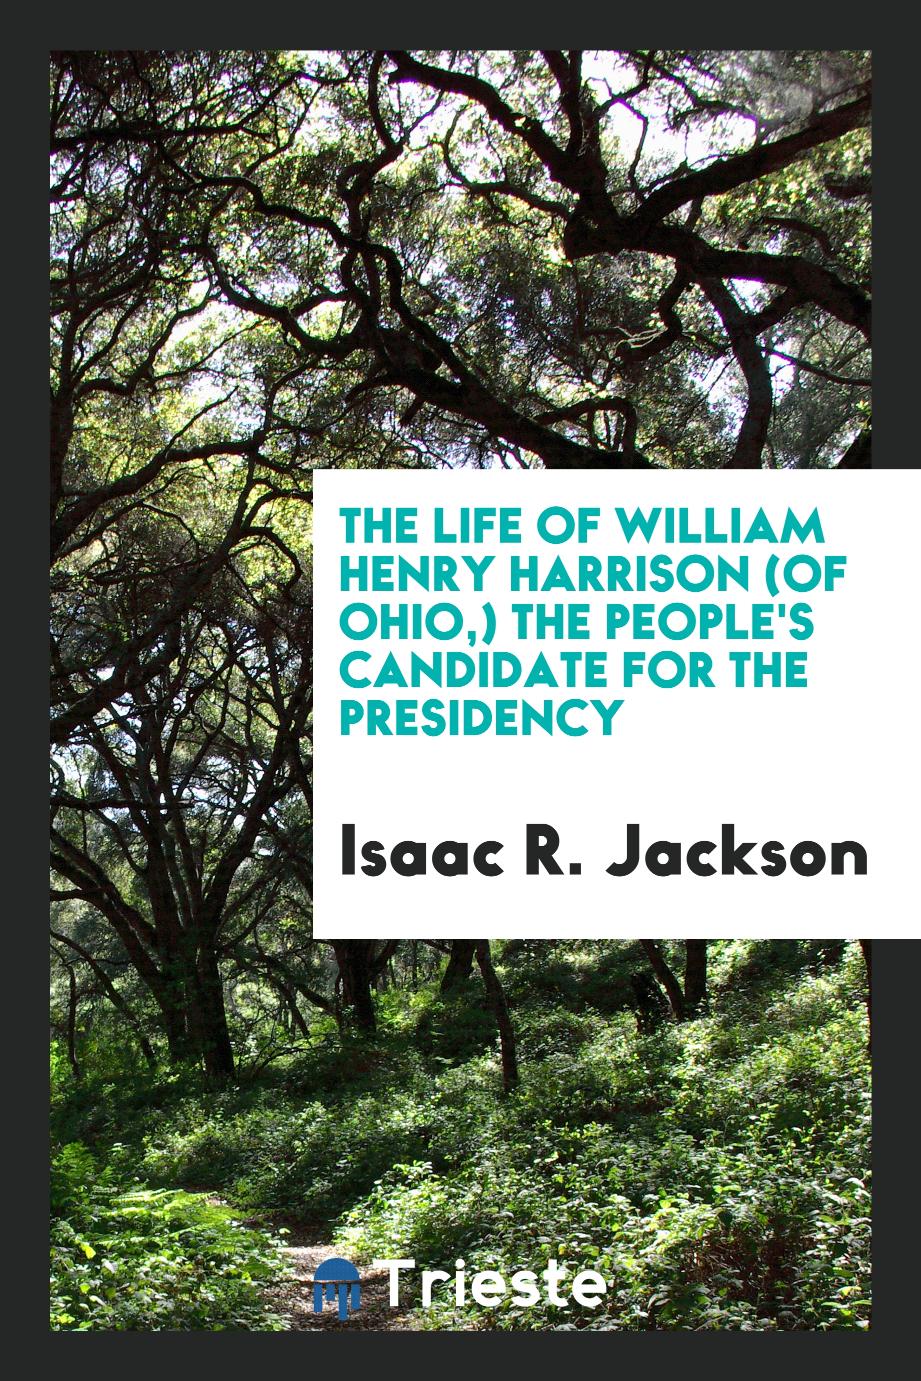 The life of William Henry Harrison (of Ohio,) the people's candidate for the presidency